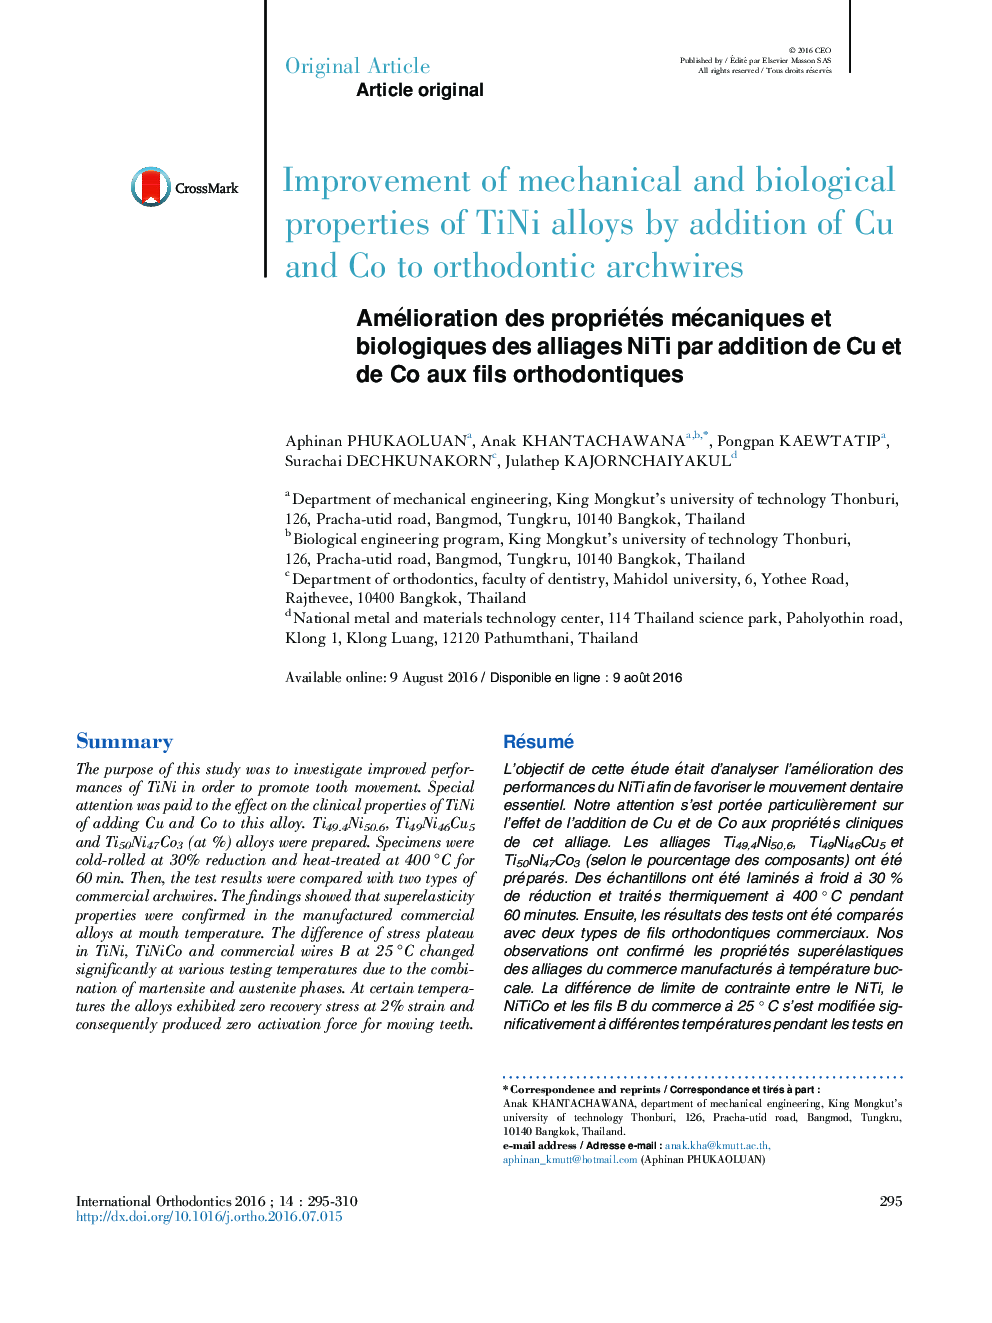 Improvement of mechanical and biological properties of TiNi alloys by addition of Cu and Co to orthodontic archwires